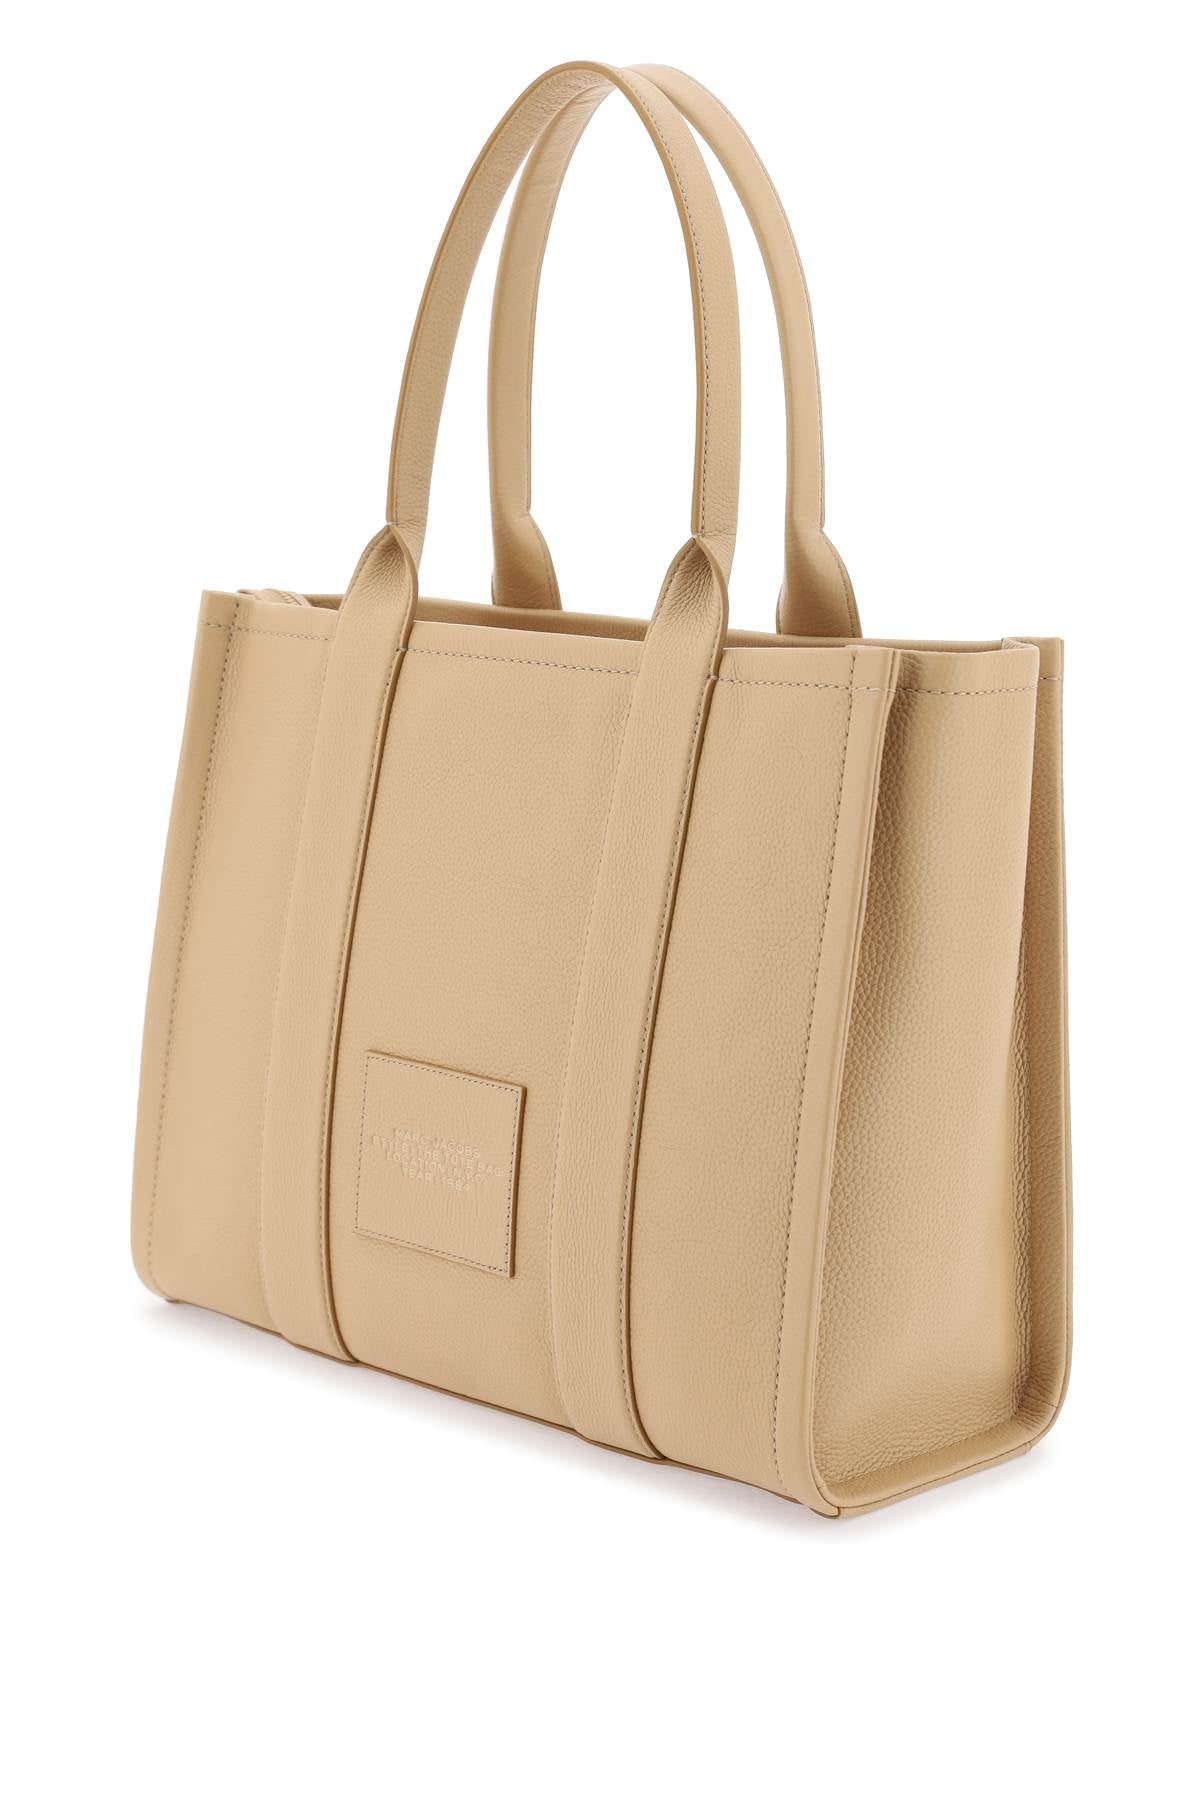 Marc jacobs the leather large tote bag-1